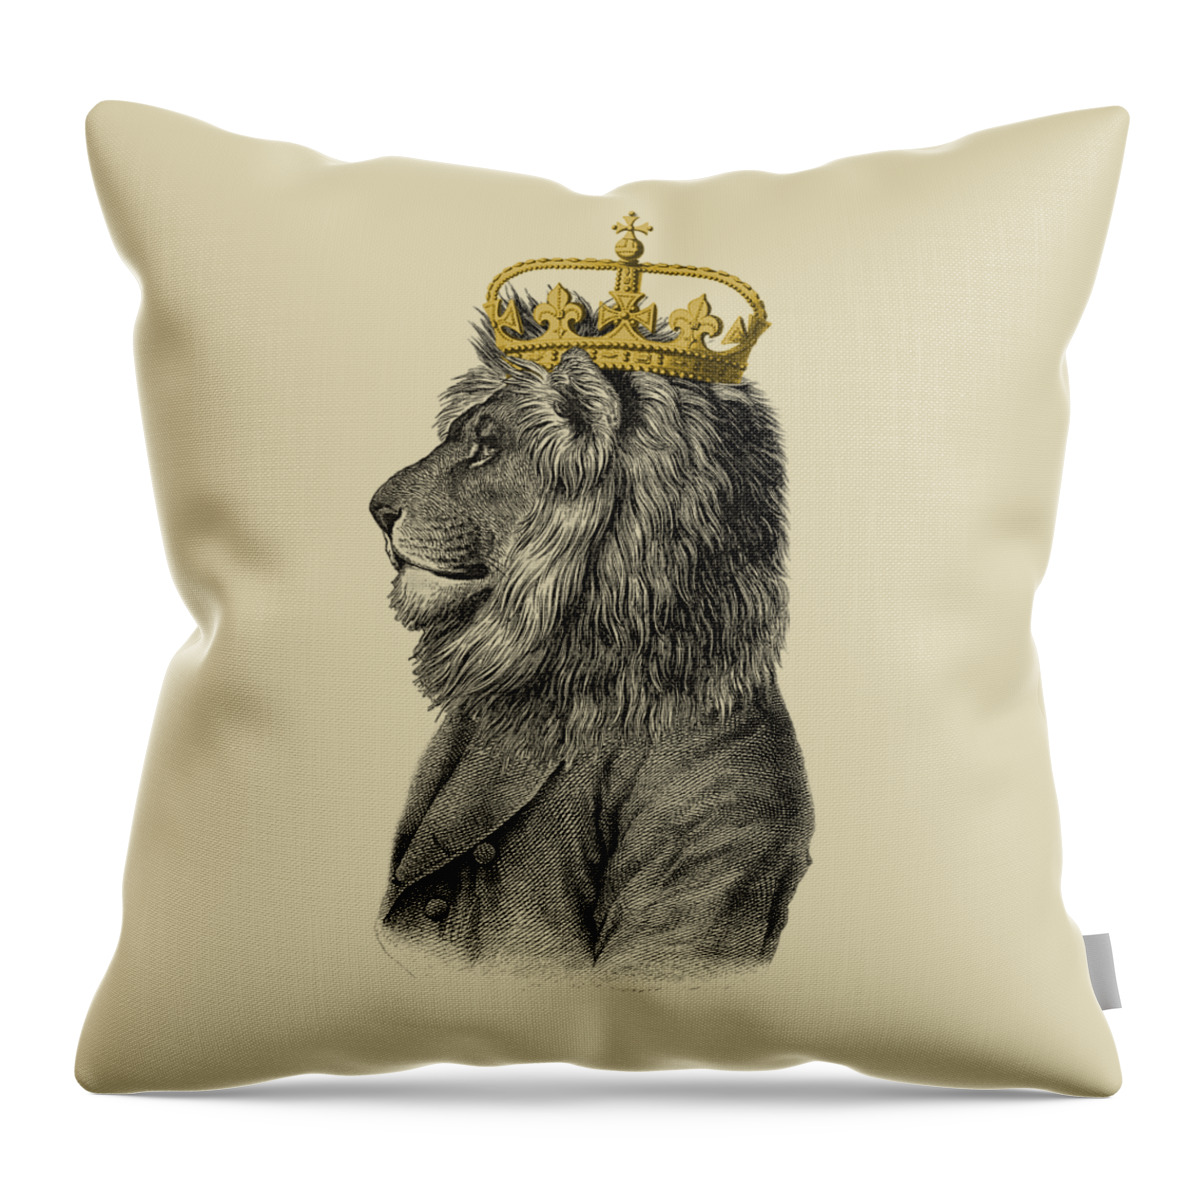 Lion Throw Pillow featuring the digital art Lion the King of the jungle by Madame Memento